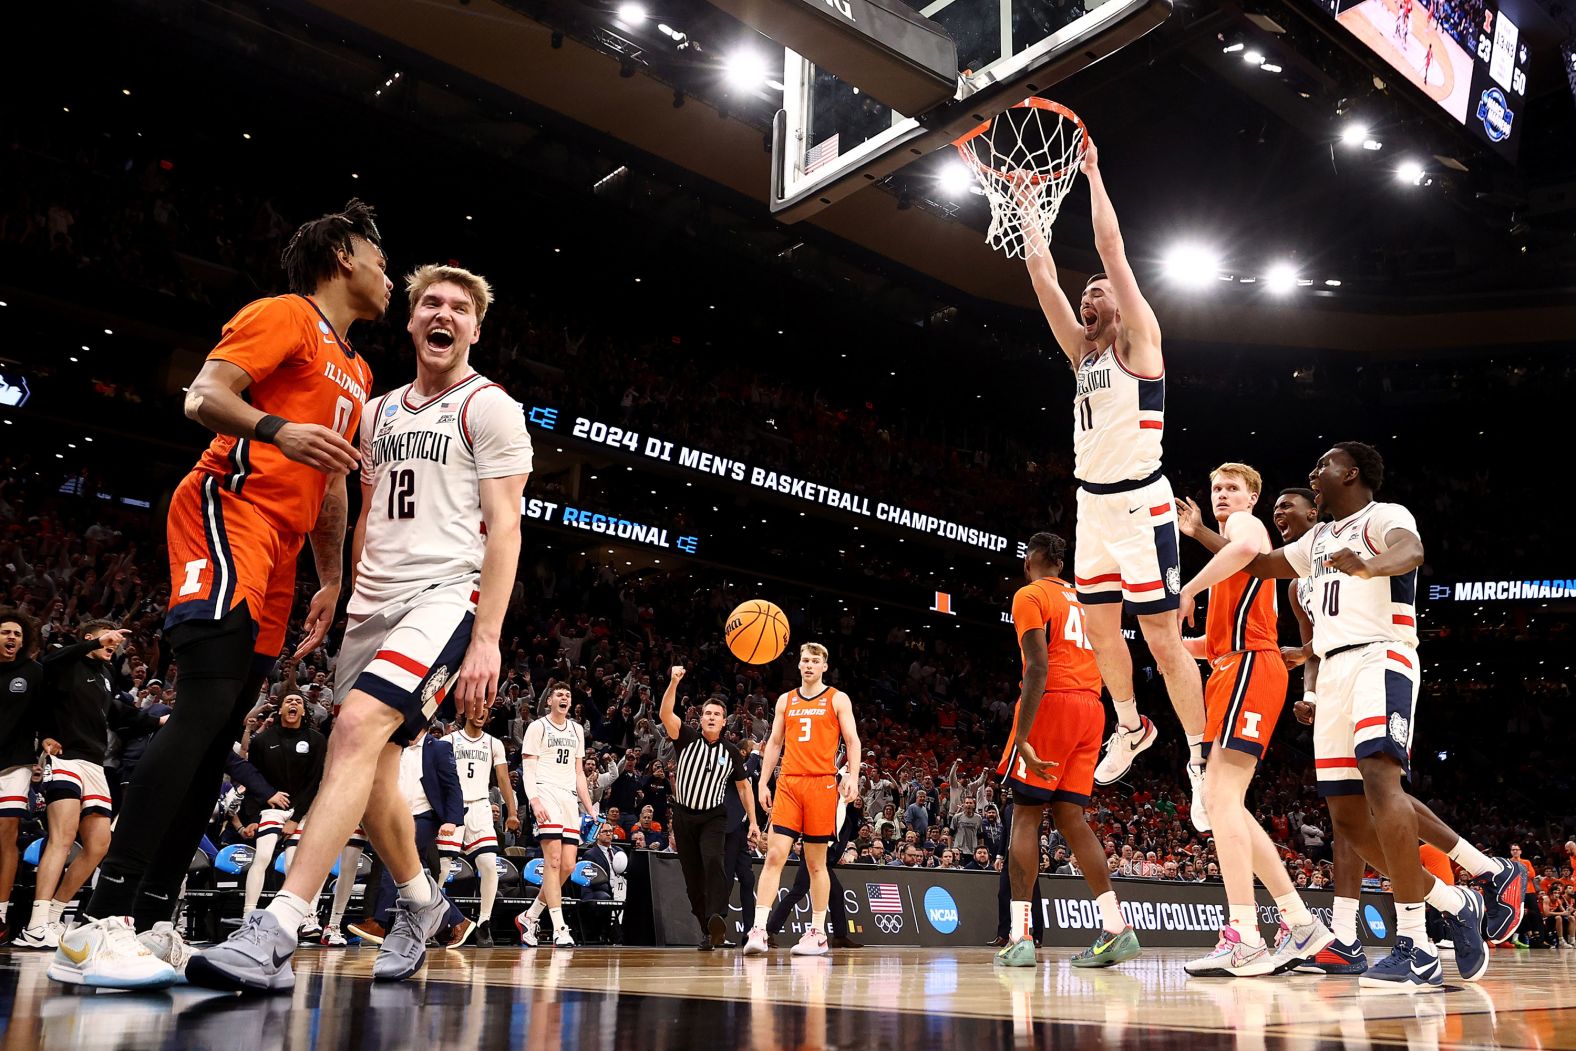 UConn forward Alex Karaban dunks the ball during <a href="index.php?page=&url=https%3A%2F%2Fwww.cnn.com%2F2024%2F03%2F31%2Fsport%2Falabama-uconn-march-madness-final-four-spt-intl%2Findex.html" target="_blank">the team's NCAA Tournament victory over Illinois</a> on Saturday, March 30. The Huskies went on a 30-0 run during the 77-52 win, clinching their second straight Final Four appearance. <a href="index.php?page=&url=http%3A%2F%2Fwww.cnn.com%2F2023%2F04%2F03%2Fsport%2Fgallery%2Fsan-diego-state-uconn-ncaa-mens-final-photos%2Findex.html" target="_blank">They won the title last year</a>.